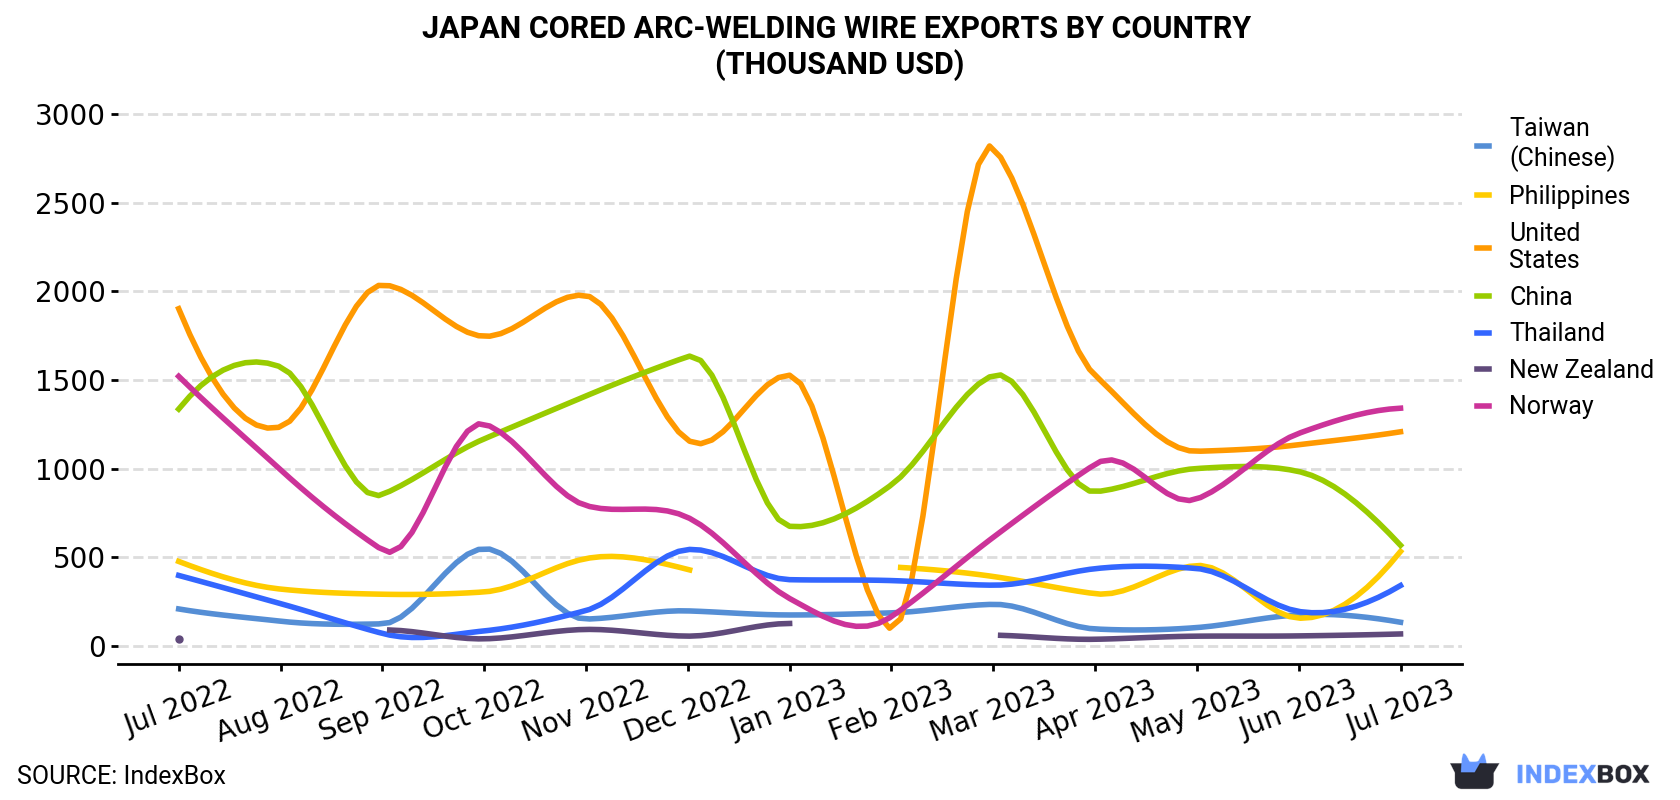 Japan Cored Arc-Welding Wire Exports By Country (Thousand USD)